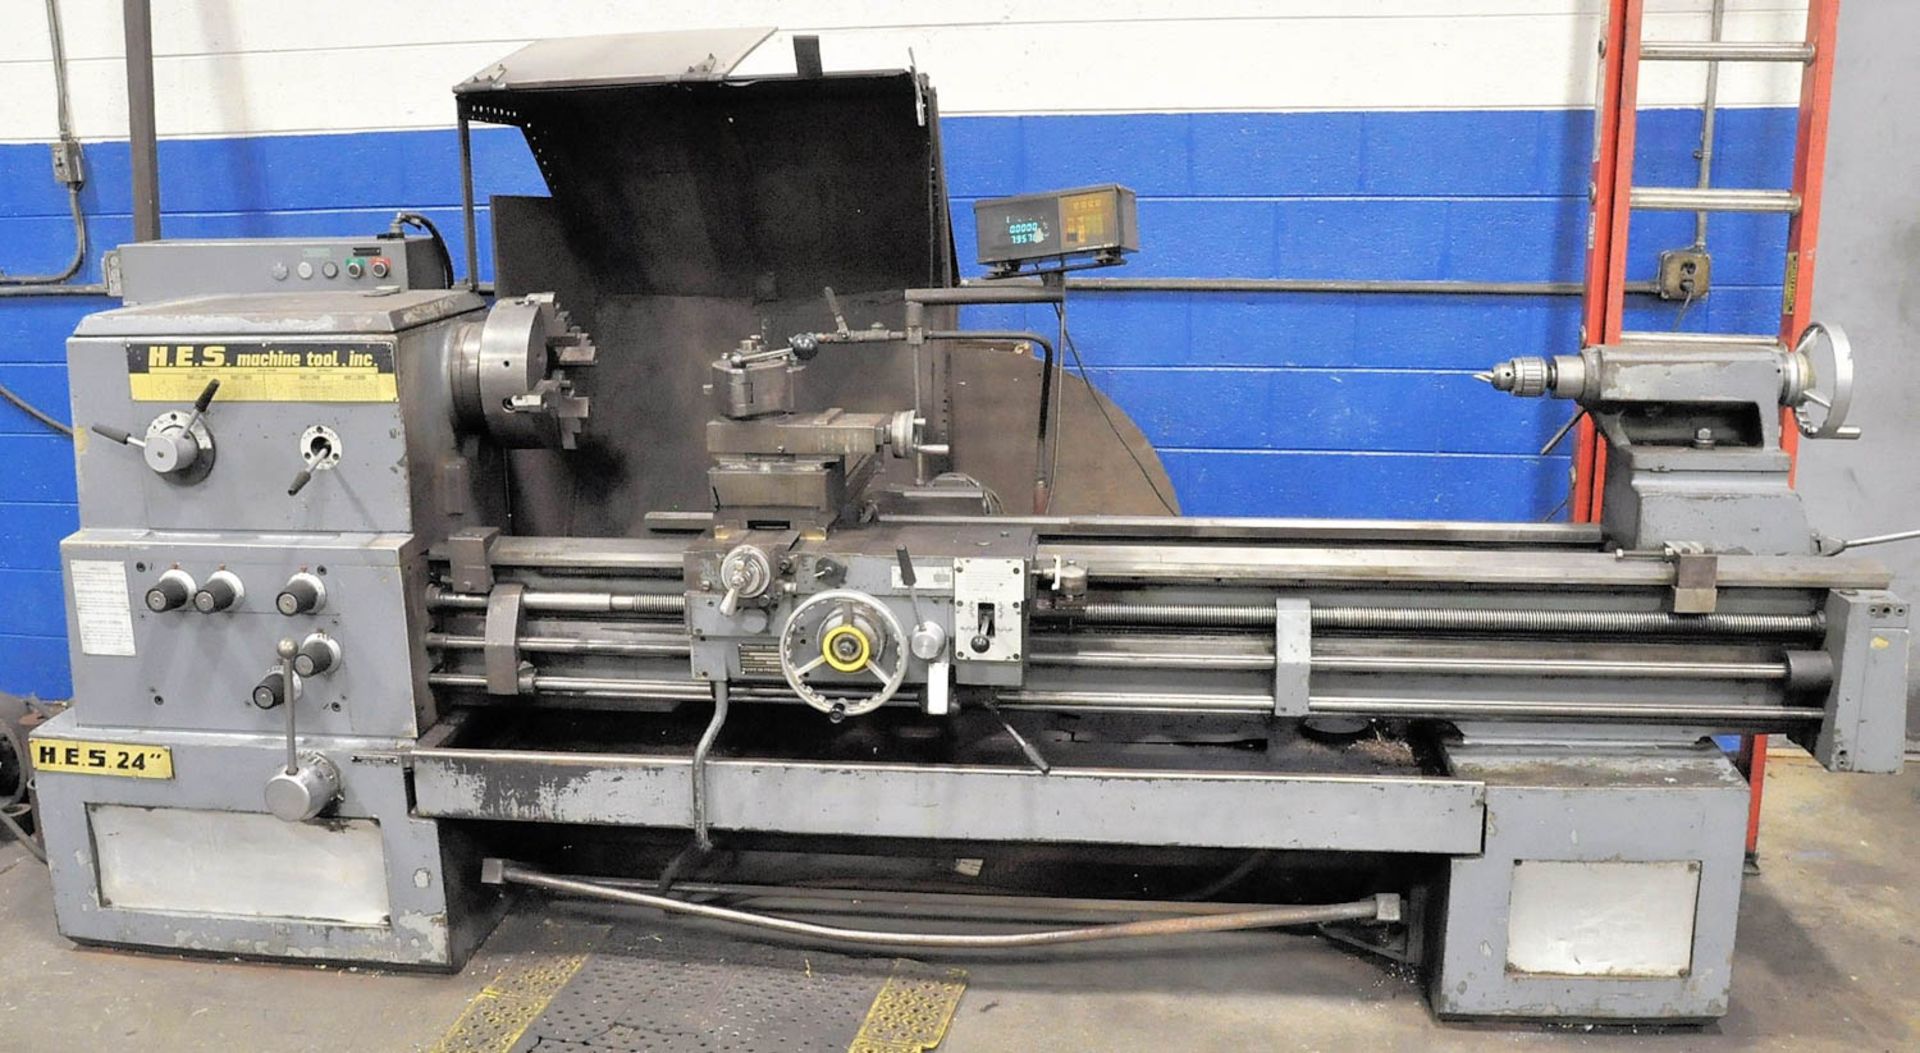 HES 24" x 80" x 16" Over Gap Capacity Geared Head Engine Lathe, with Quick Change Tool Post,